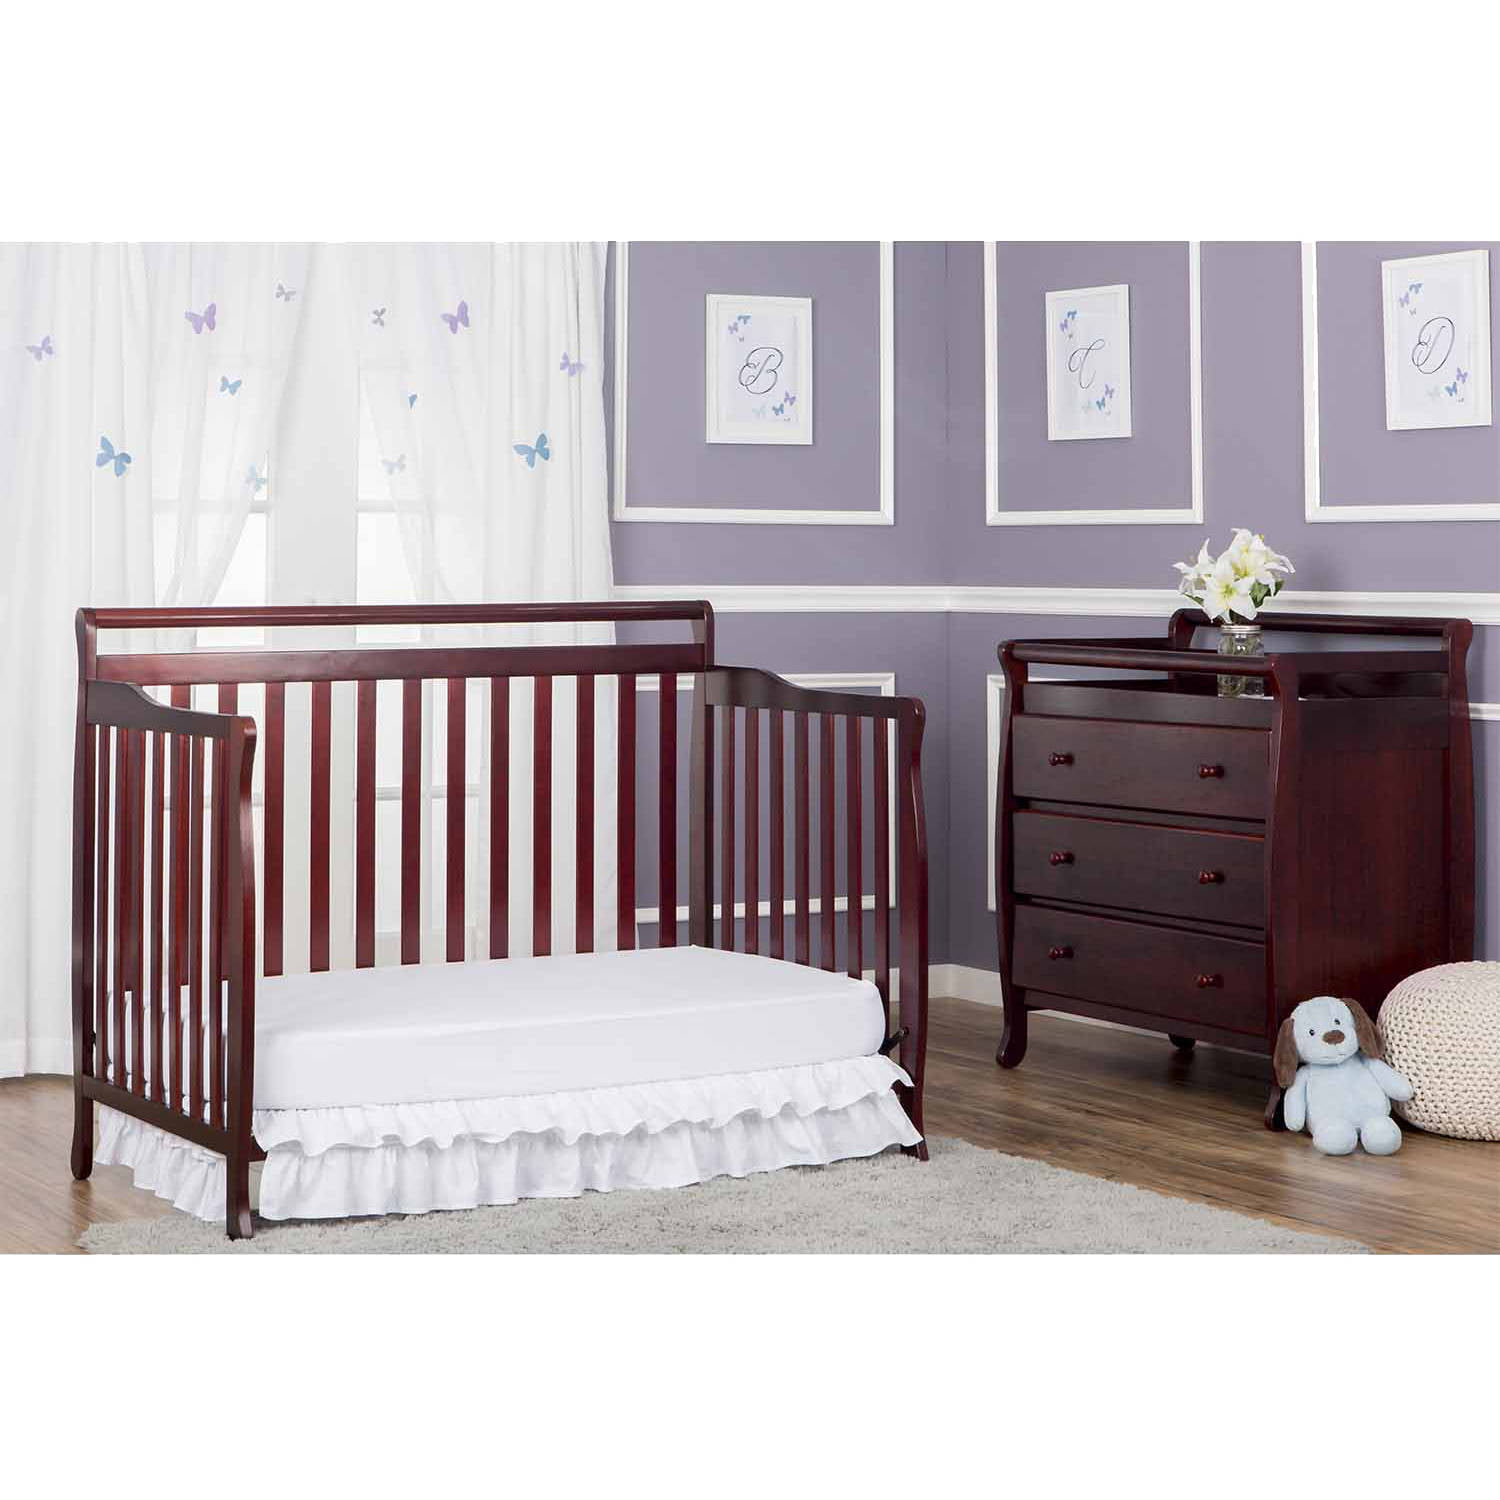 5 in one crib